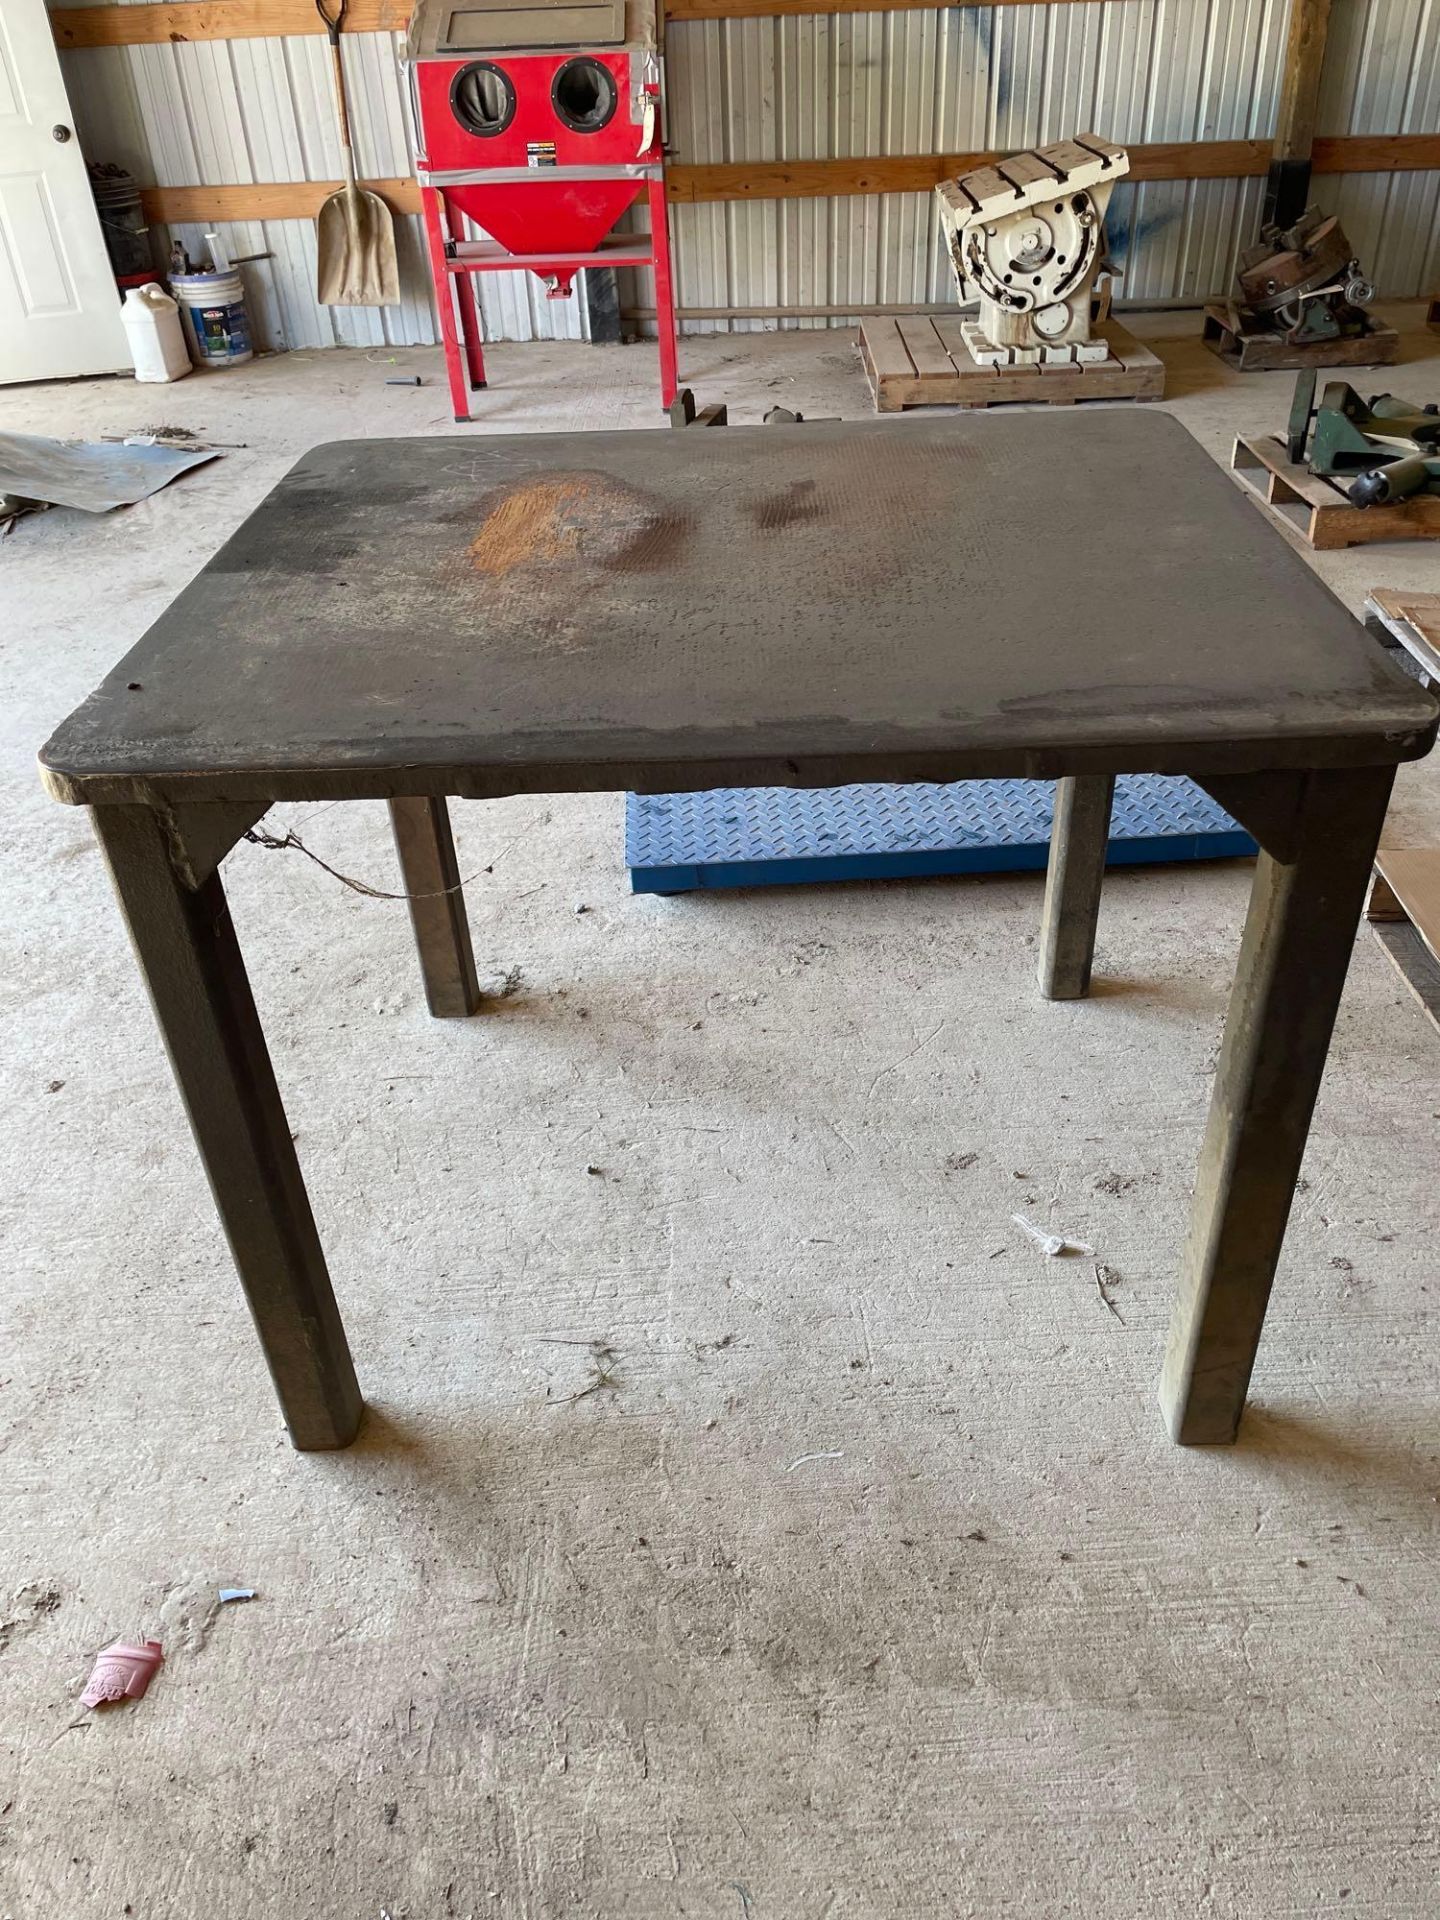 45” X 39” X 36” Heavy Duty Metal Table, 1 1/4” Solid Metal Top - Image 2 of 3